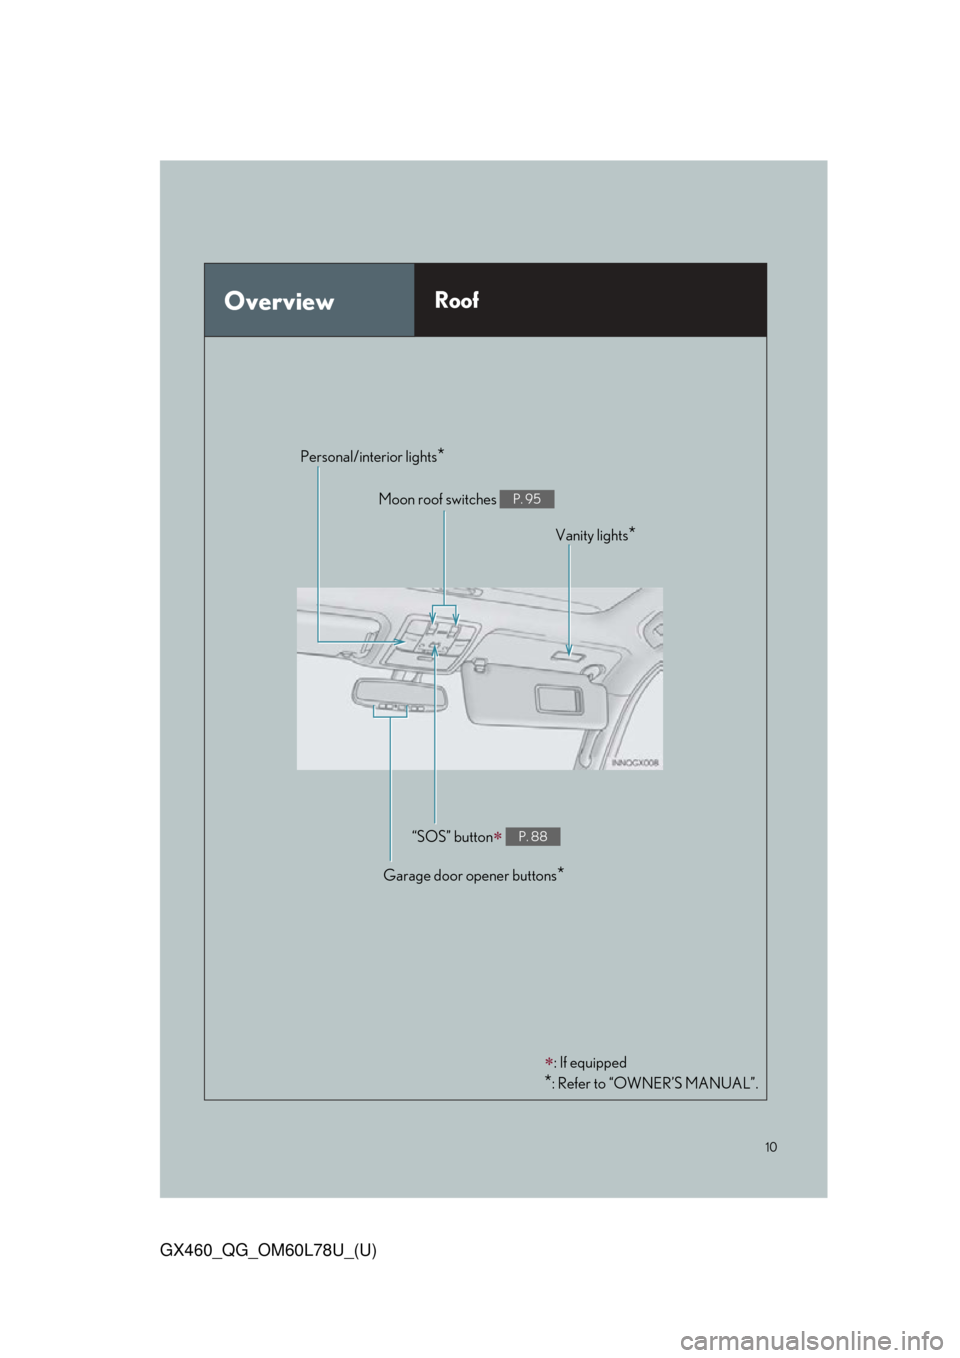 Lexus GX460 2015  TIPS FOR THE NAVIGATION SYSTEM / LEXUS 2015 GX460 QUICK GUIDE OWNERS MANUAL (OM60L78U) 10
GX460_QG_OM60L78U_(U)
OverviewRoof
: If equipped
*: Refer to “OWNER’S MANUAL”.
Garage door opener buttons*
“SOS” button P. 88
Vanity lights*
Personal/interior lights*
Moon roof swit